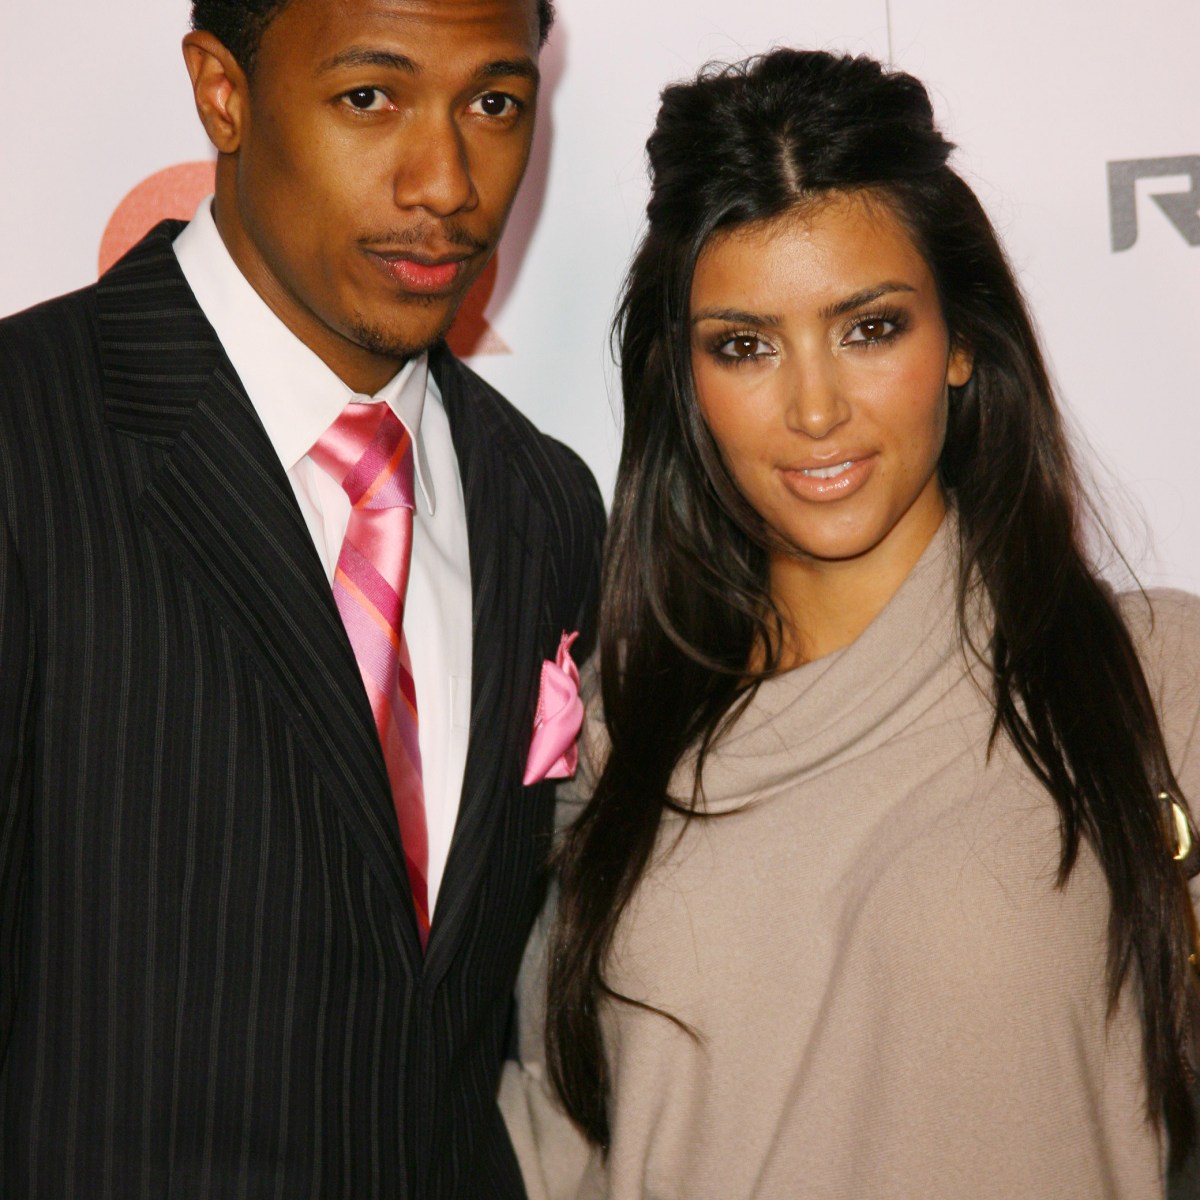 Nick dated cannon has who Nick Cannon